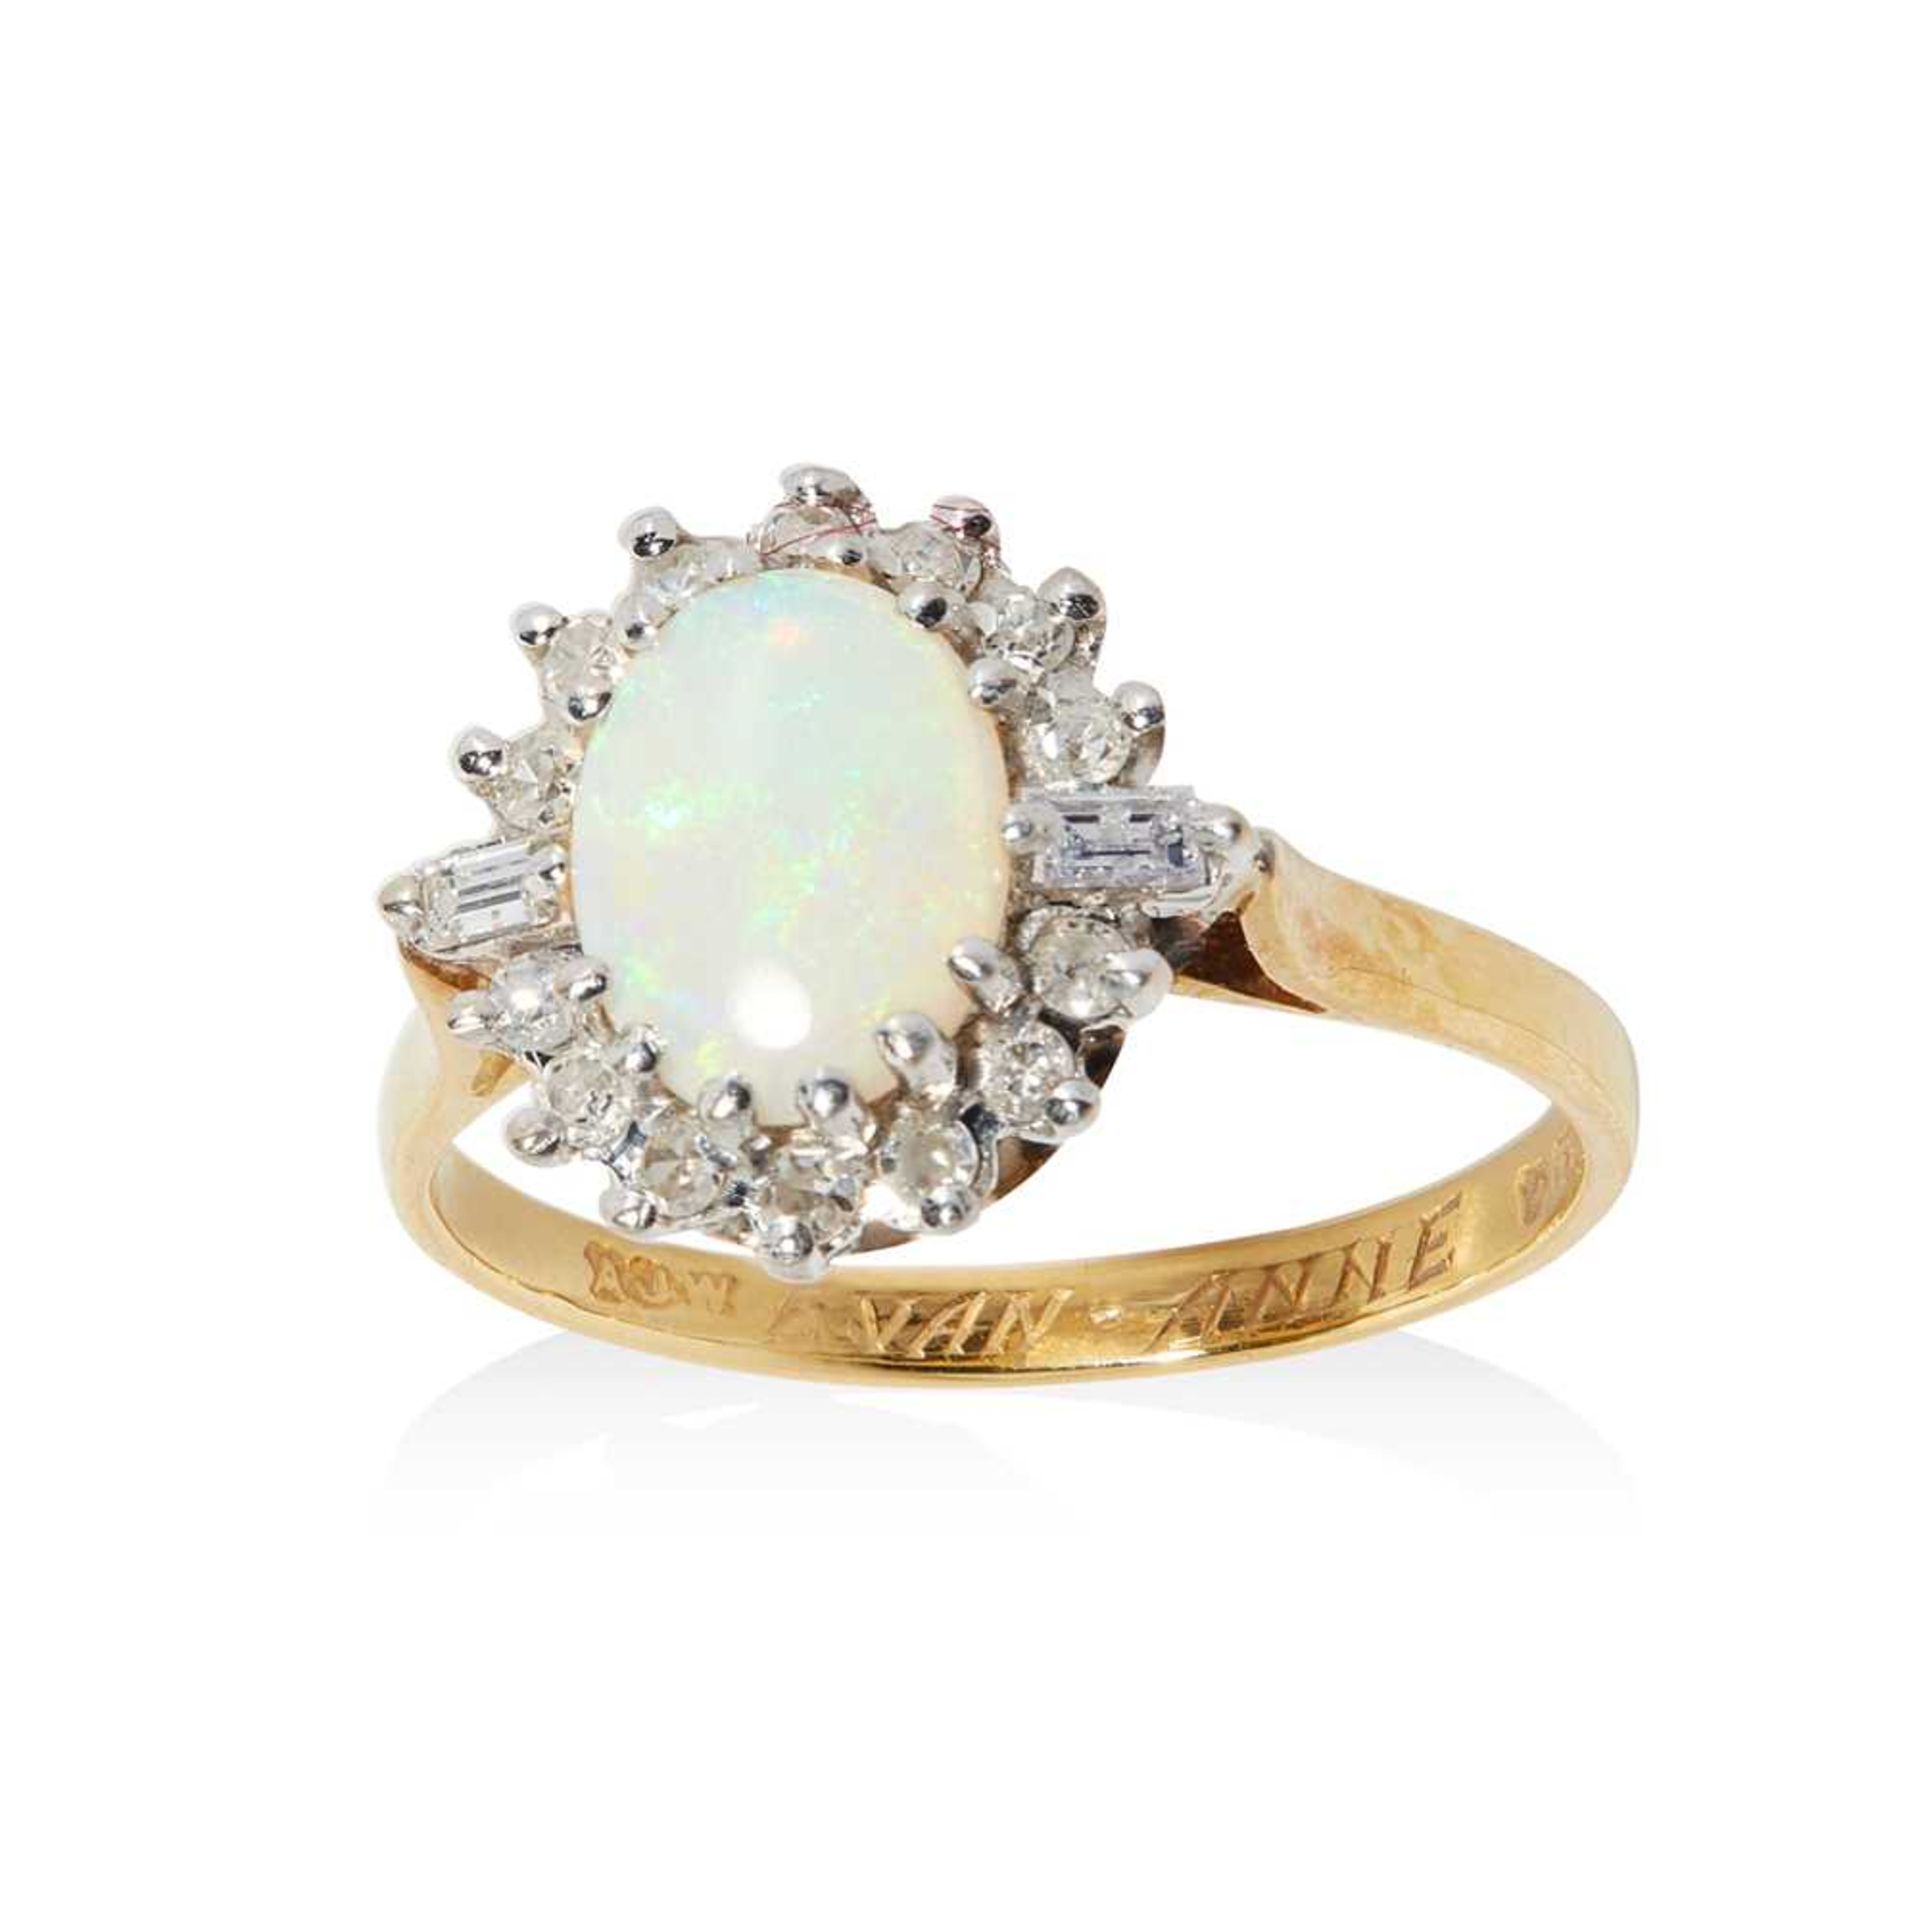 An opal and diamond cluster ring